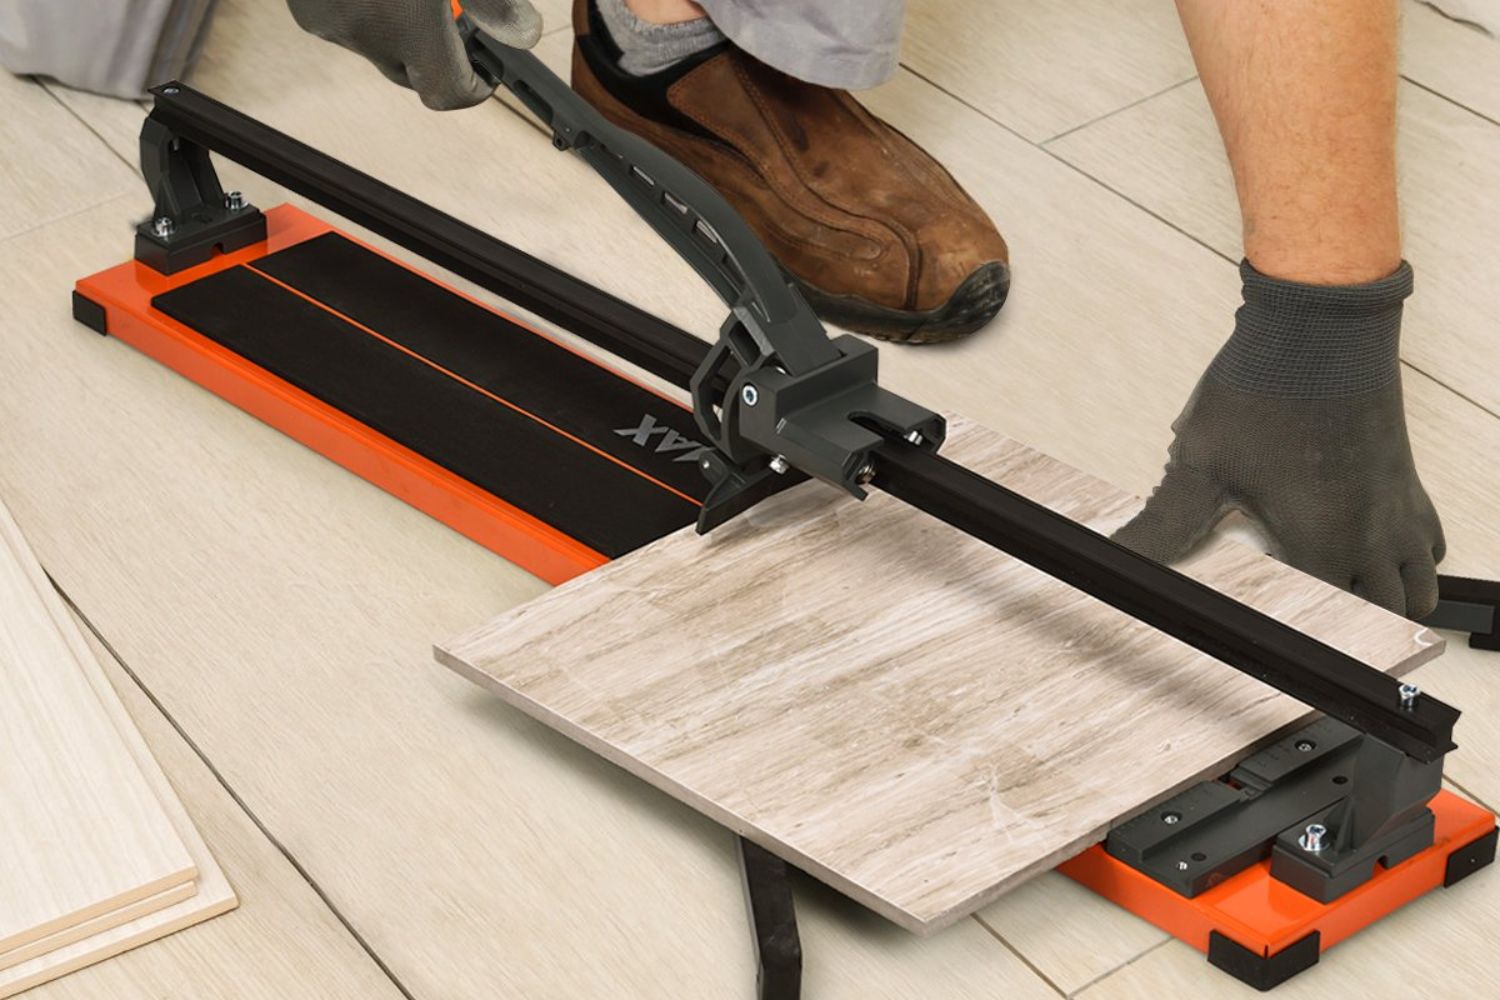 A person using the best manual tile cutter option to manually cut a tile